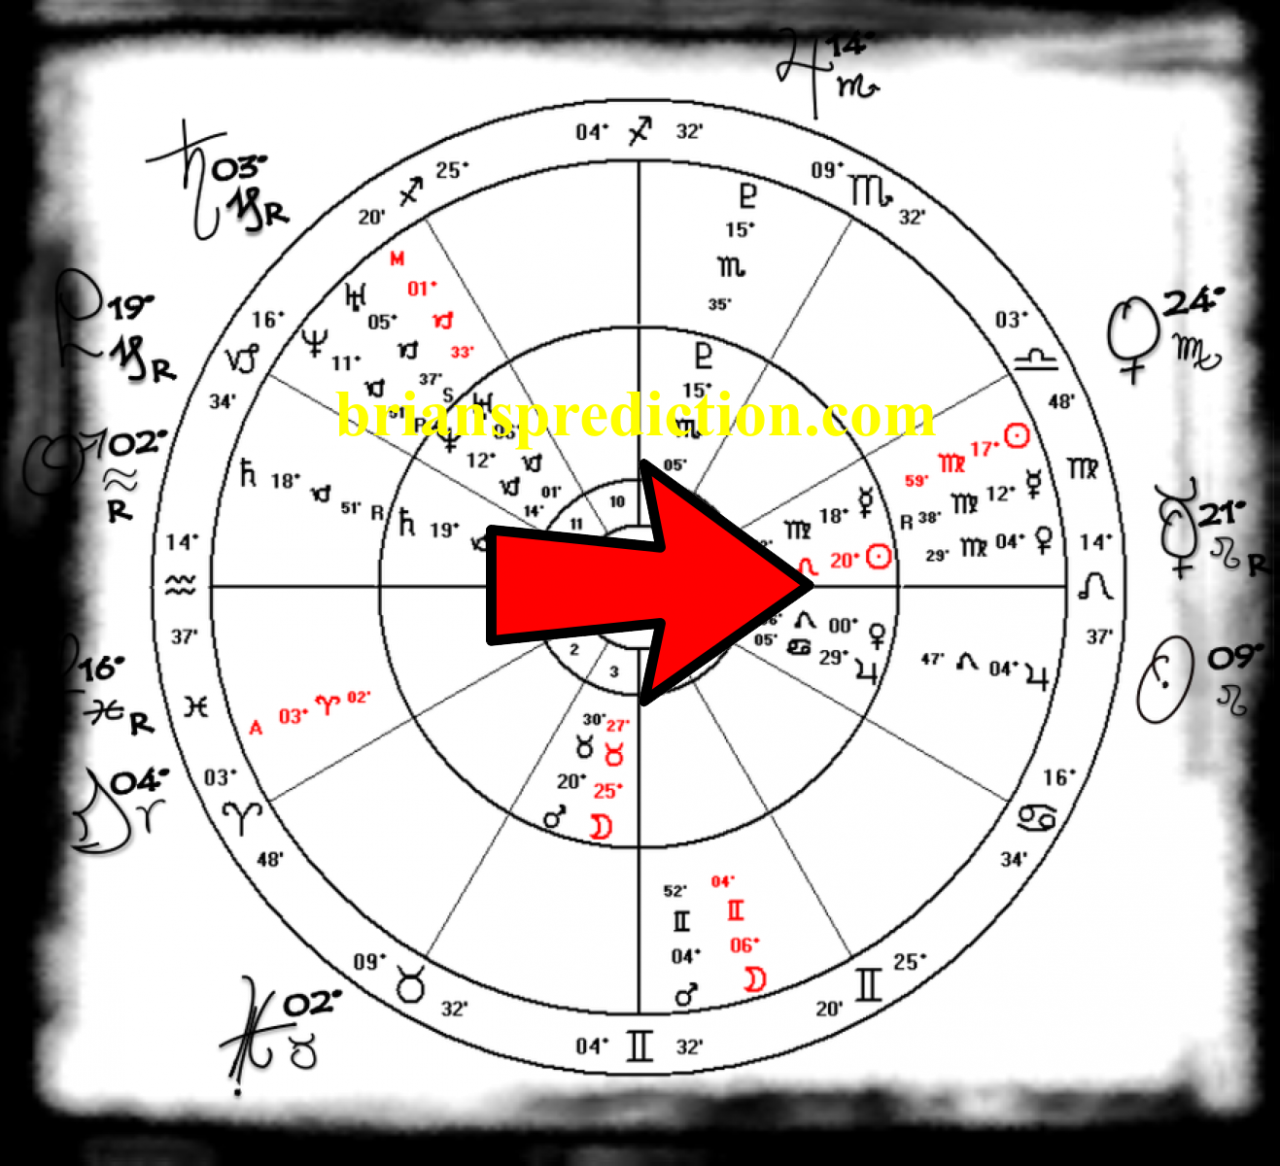 Samantha Sayers Is Alive Samantha-sayers-birth-chart-with-progressions-with-transits 1 Orig  Psychic Brian Ladd Brian Ladd Pychic Prediction 2019
Samantha Sayers Is Alive Samantha-sayers-birth-chart-with-progressions-with-transits 1 Orig  Psychic Brian Ladd Brian Ladd Pychic Prediction 2019
